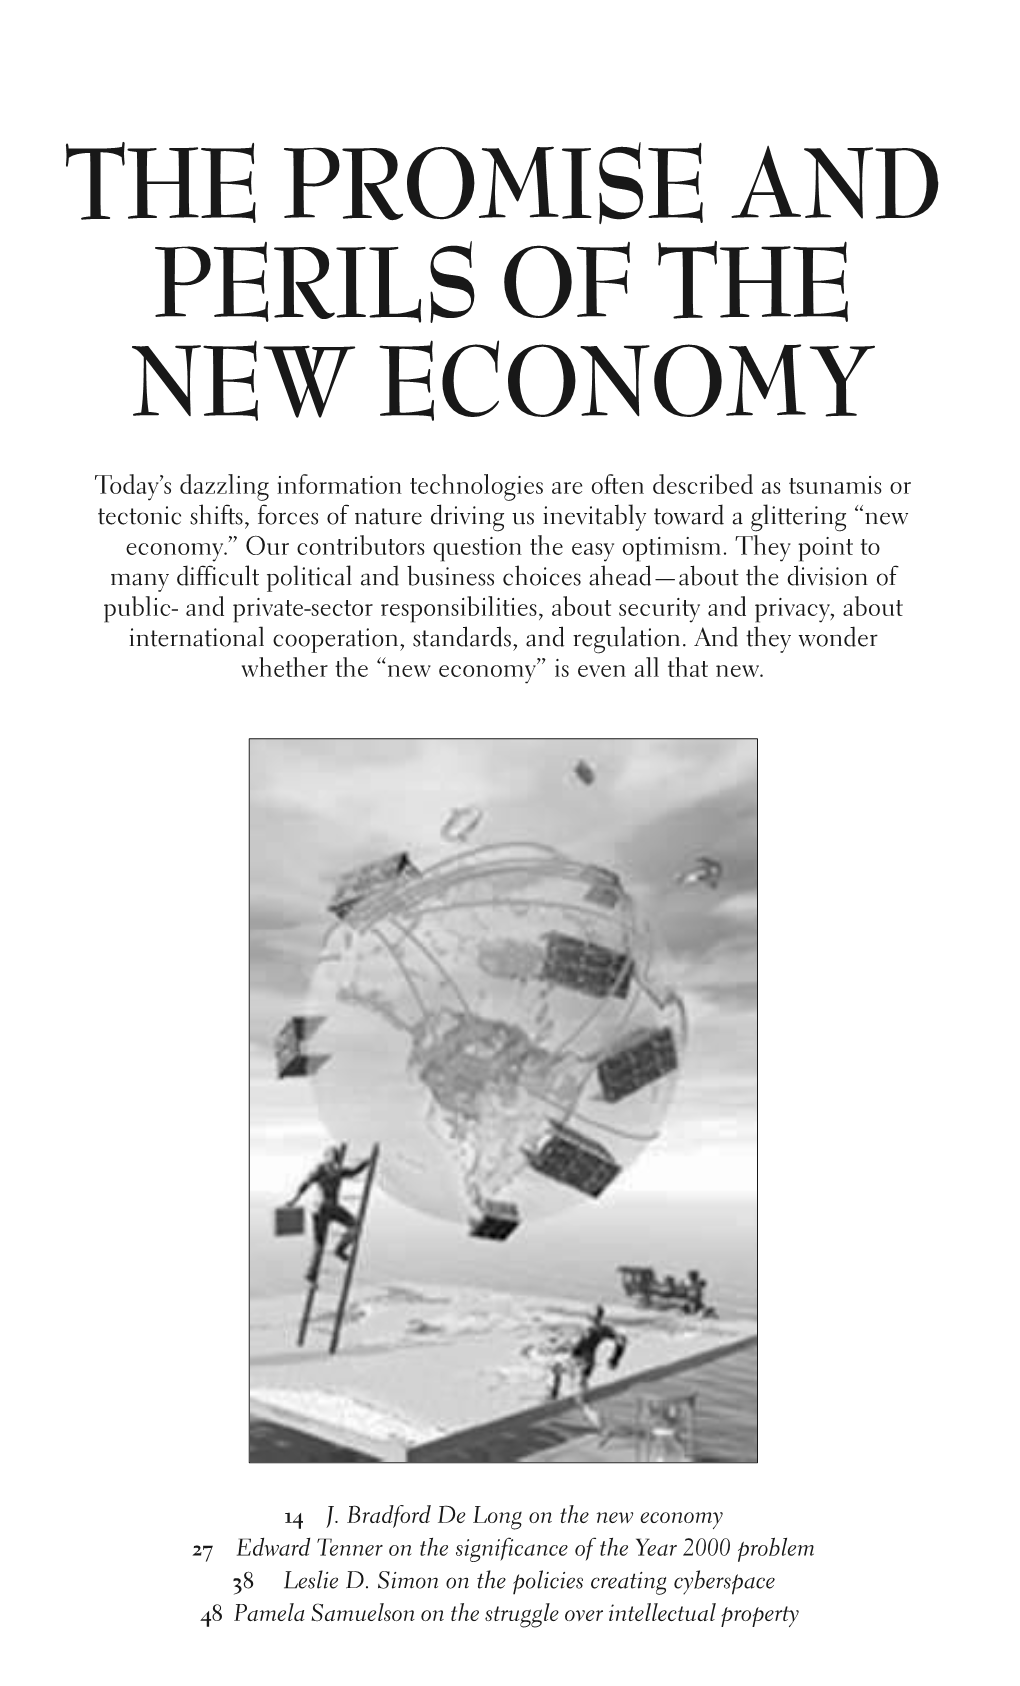 The Promise and Perils of the New Economy